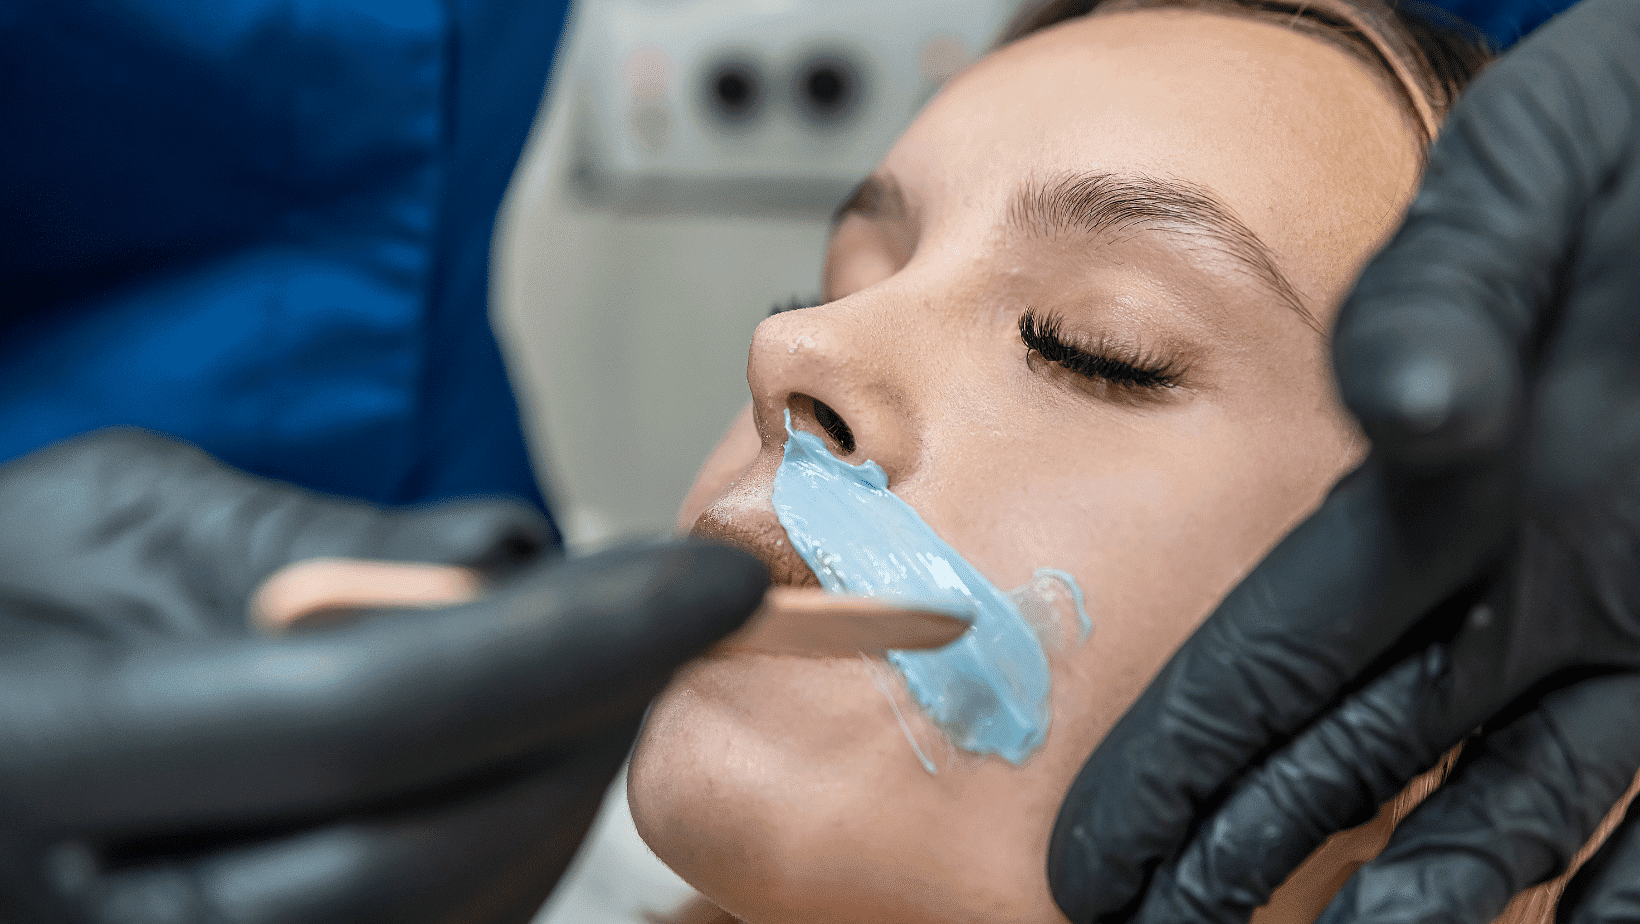 Woman receiving dental treatment with a numbing gel application.